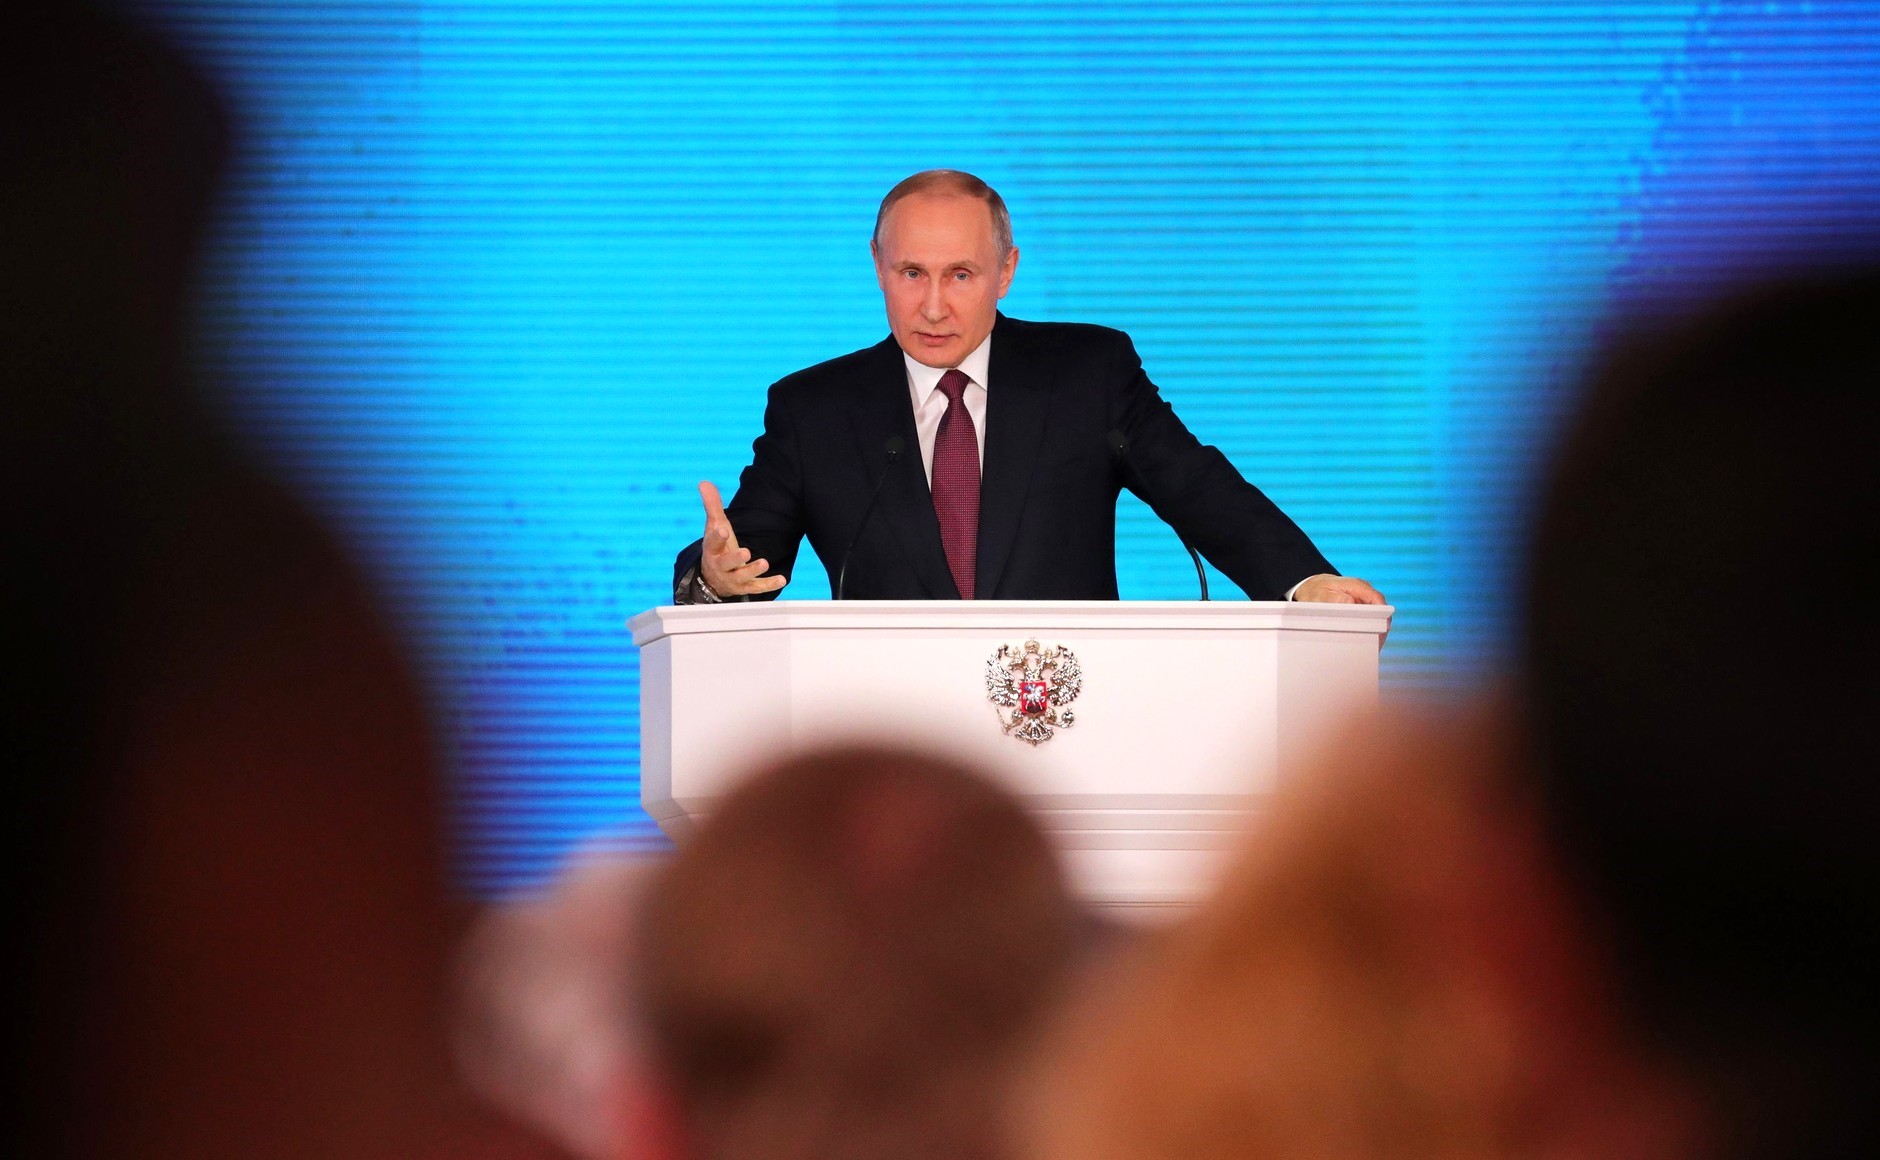 President Putin delivers annual address to Federal Assembly of Russia